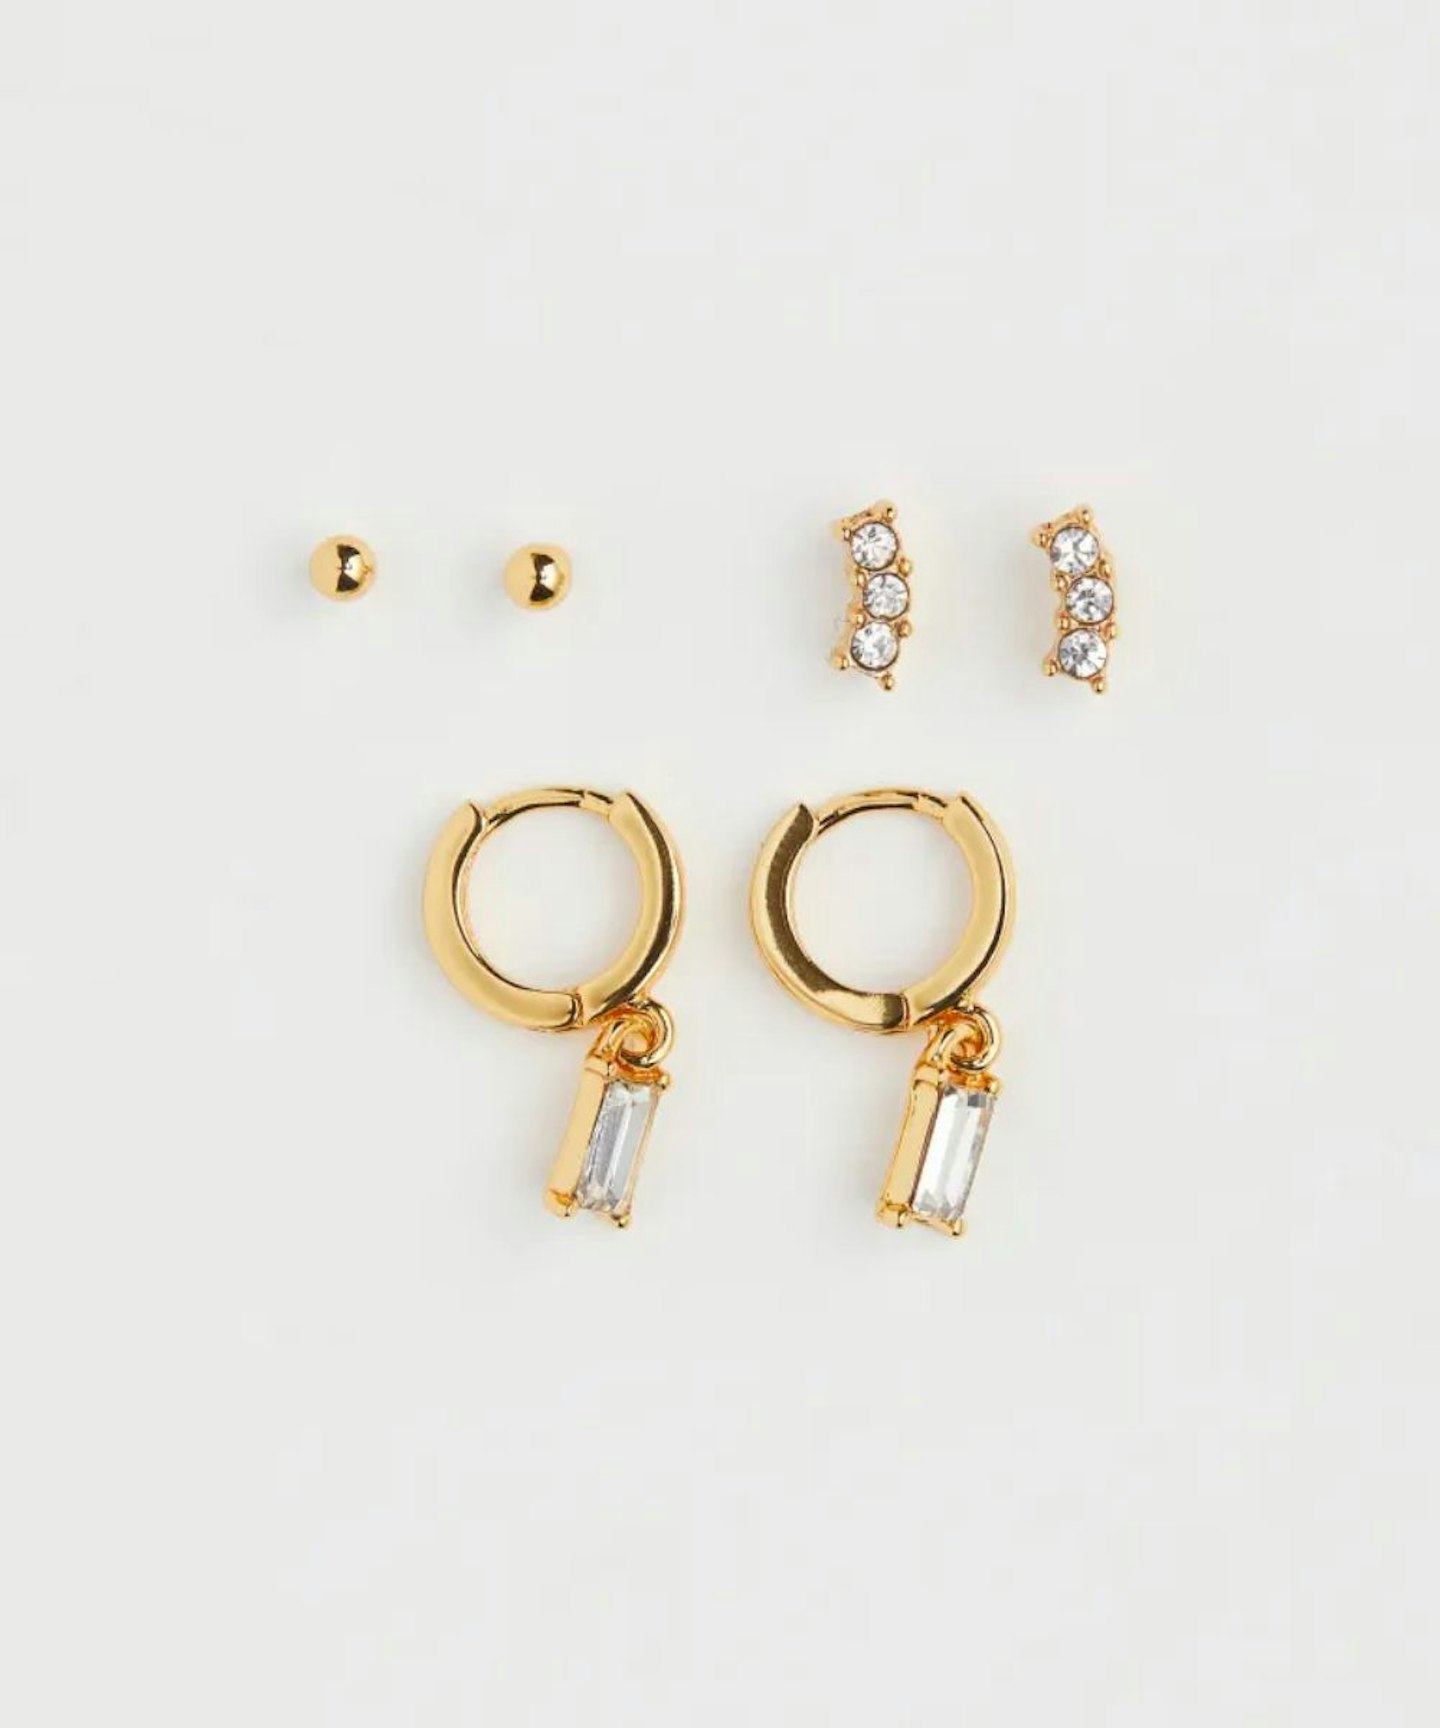 H&M 3 pairs gold-plated earrings and studs